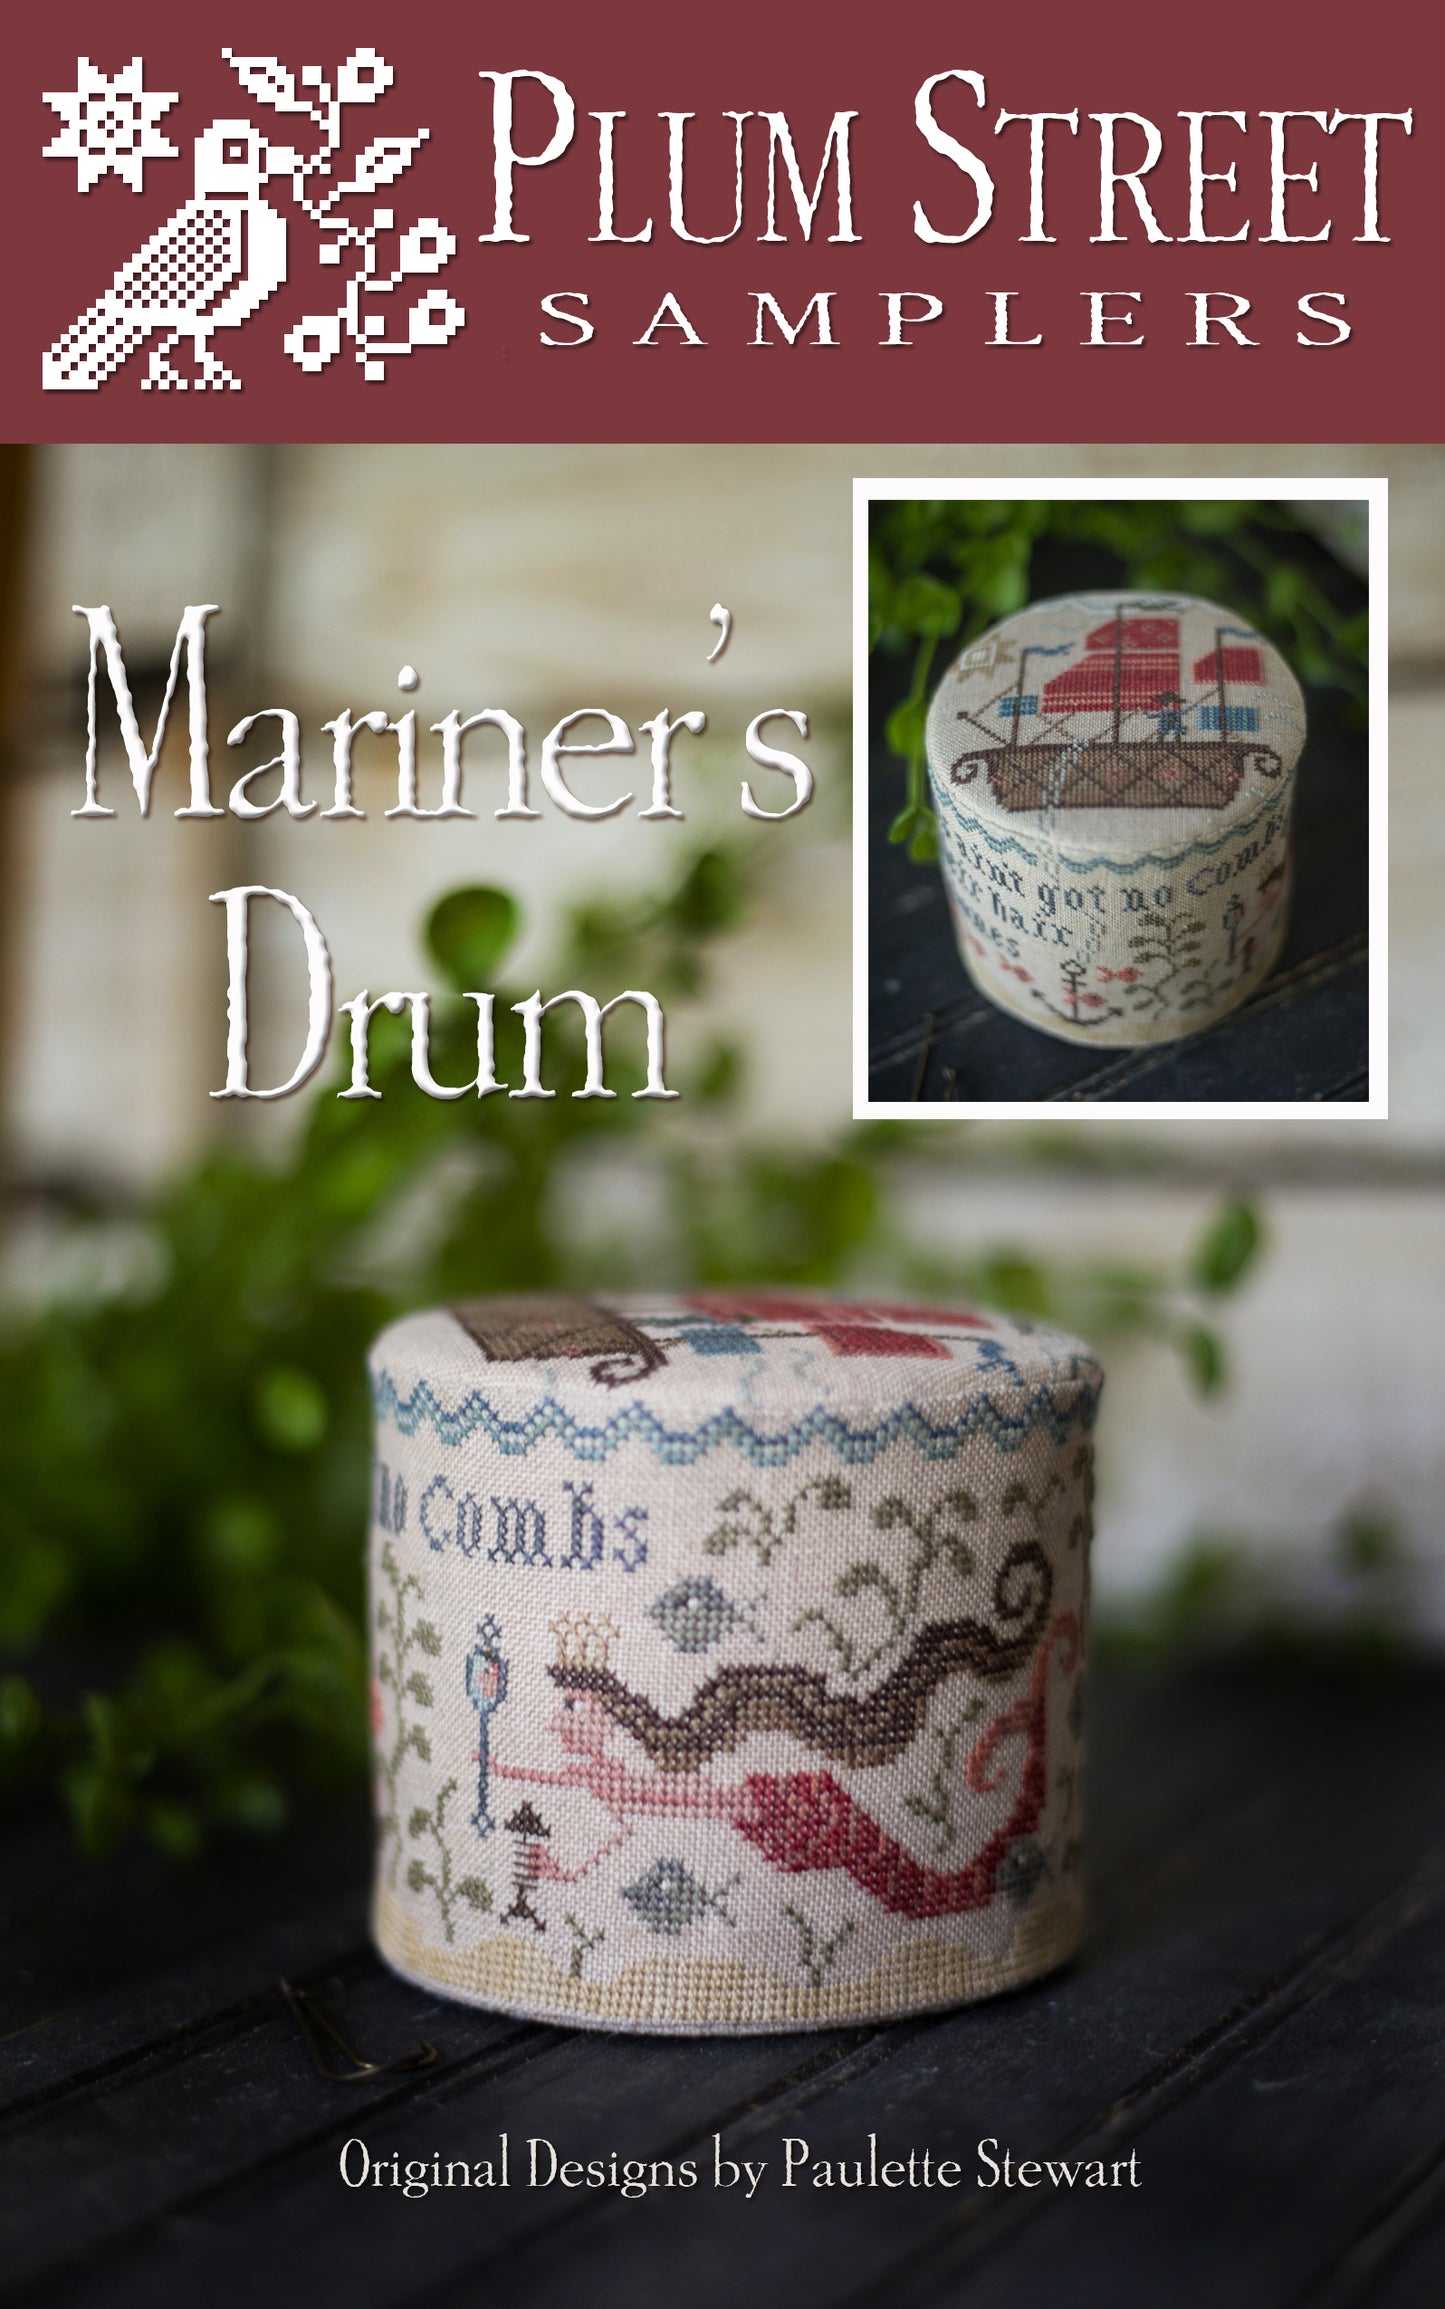 Mariner's Drum Cross Stitch Embroidery Kit from Plum Street Samplers: Pattern, Linen, Floss